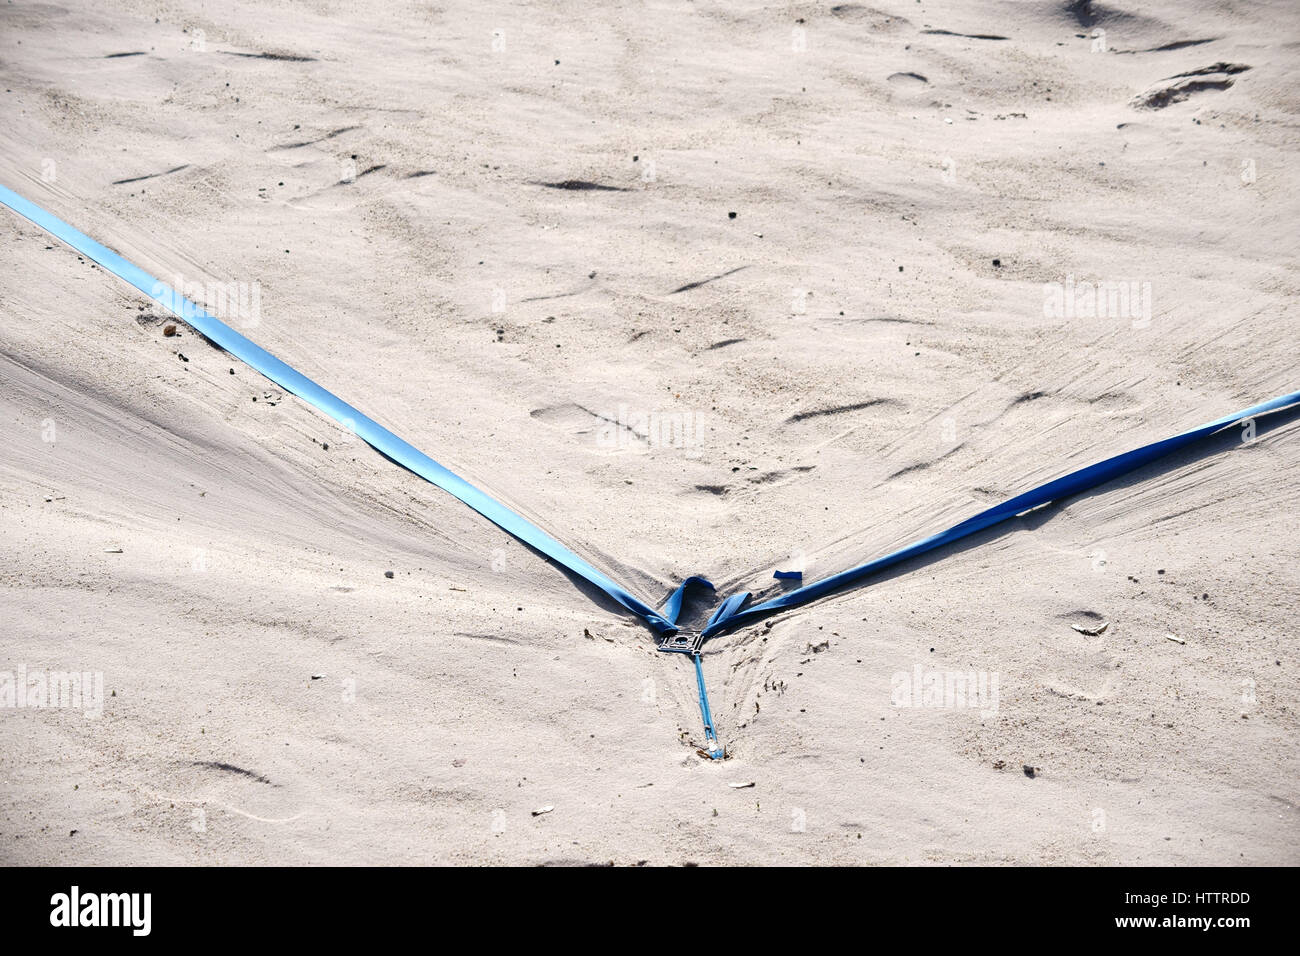 The marking of a beach volleyball field with tension cables in the sand beach. Stock Photo